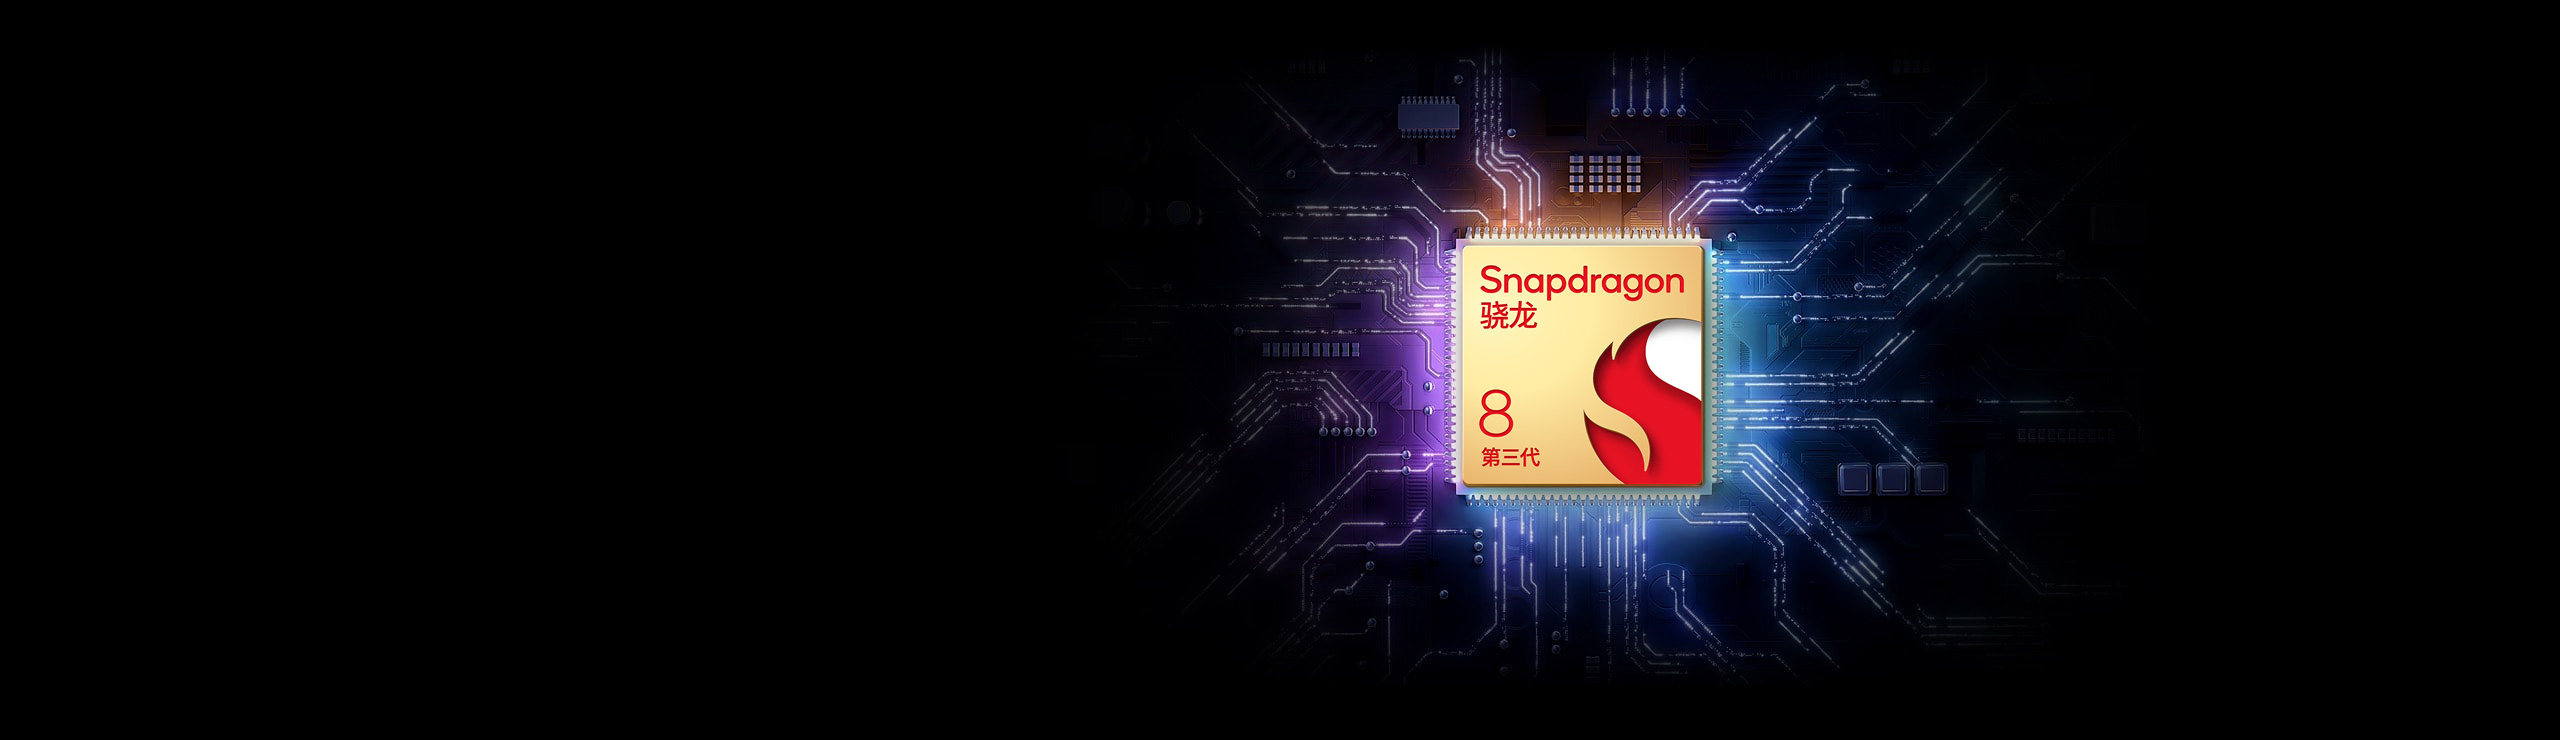 The image of the Snapdragon® 8 Gen 3 CPU with purple and blue lights on the printed circuit board in the background.